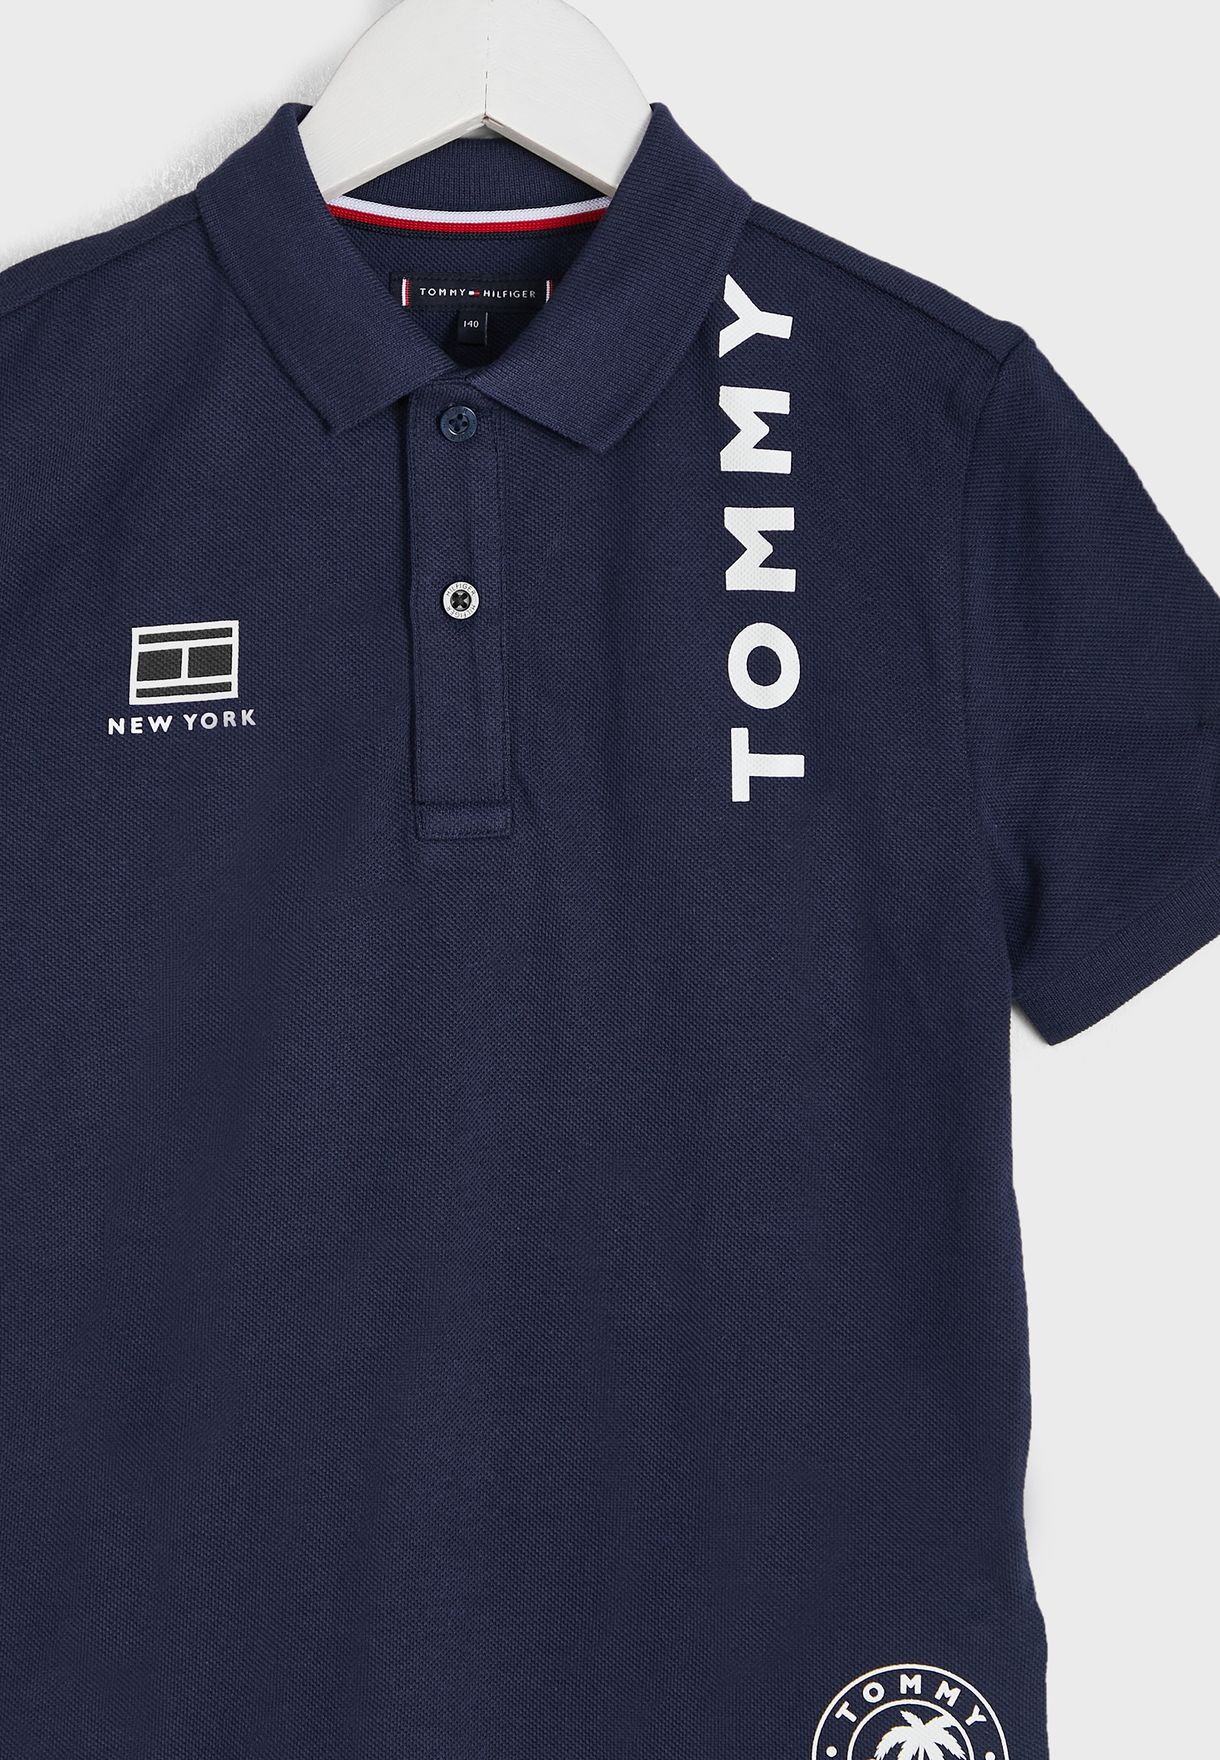 Kids Placement Print Polo